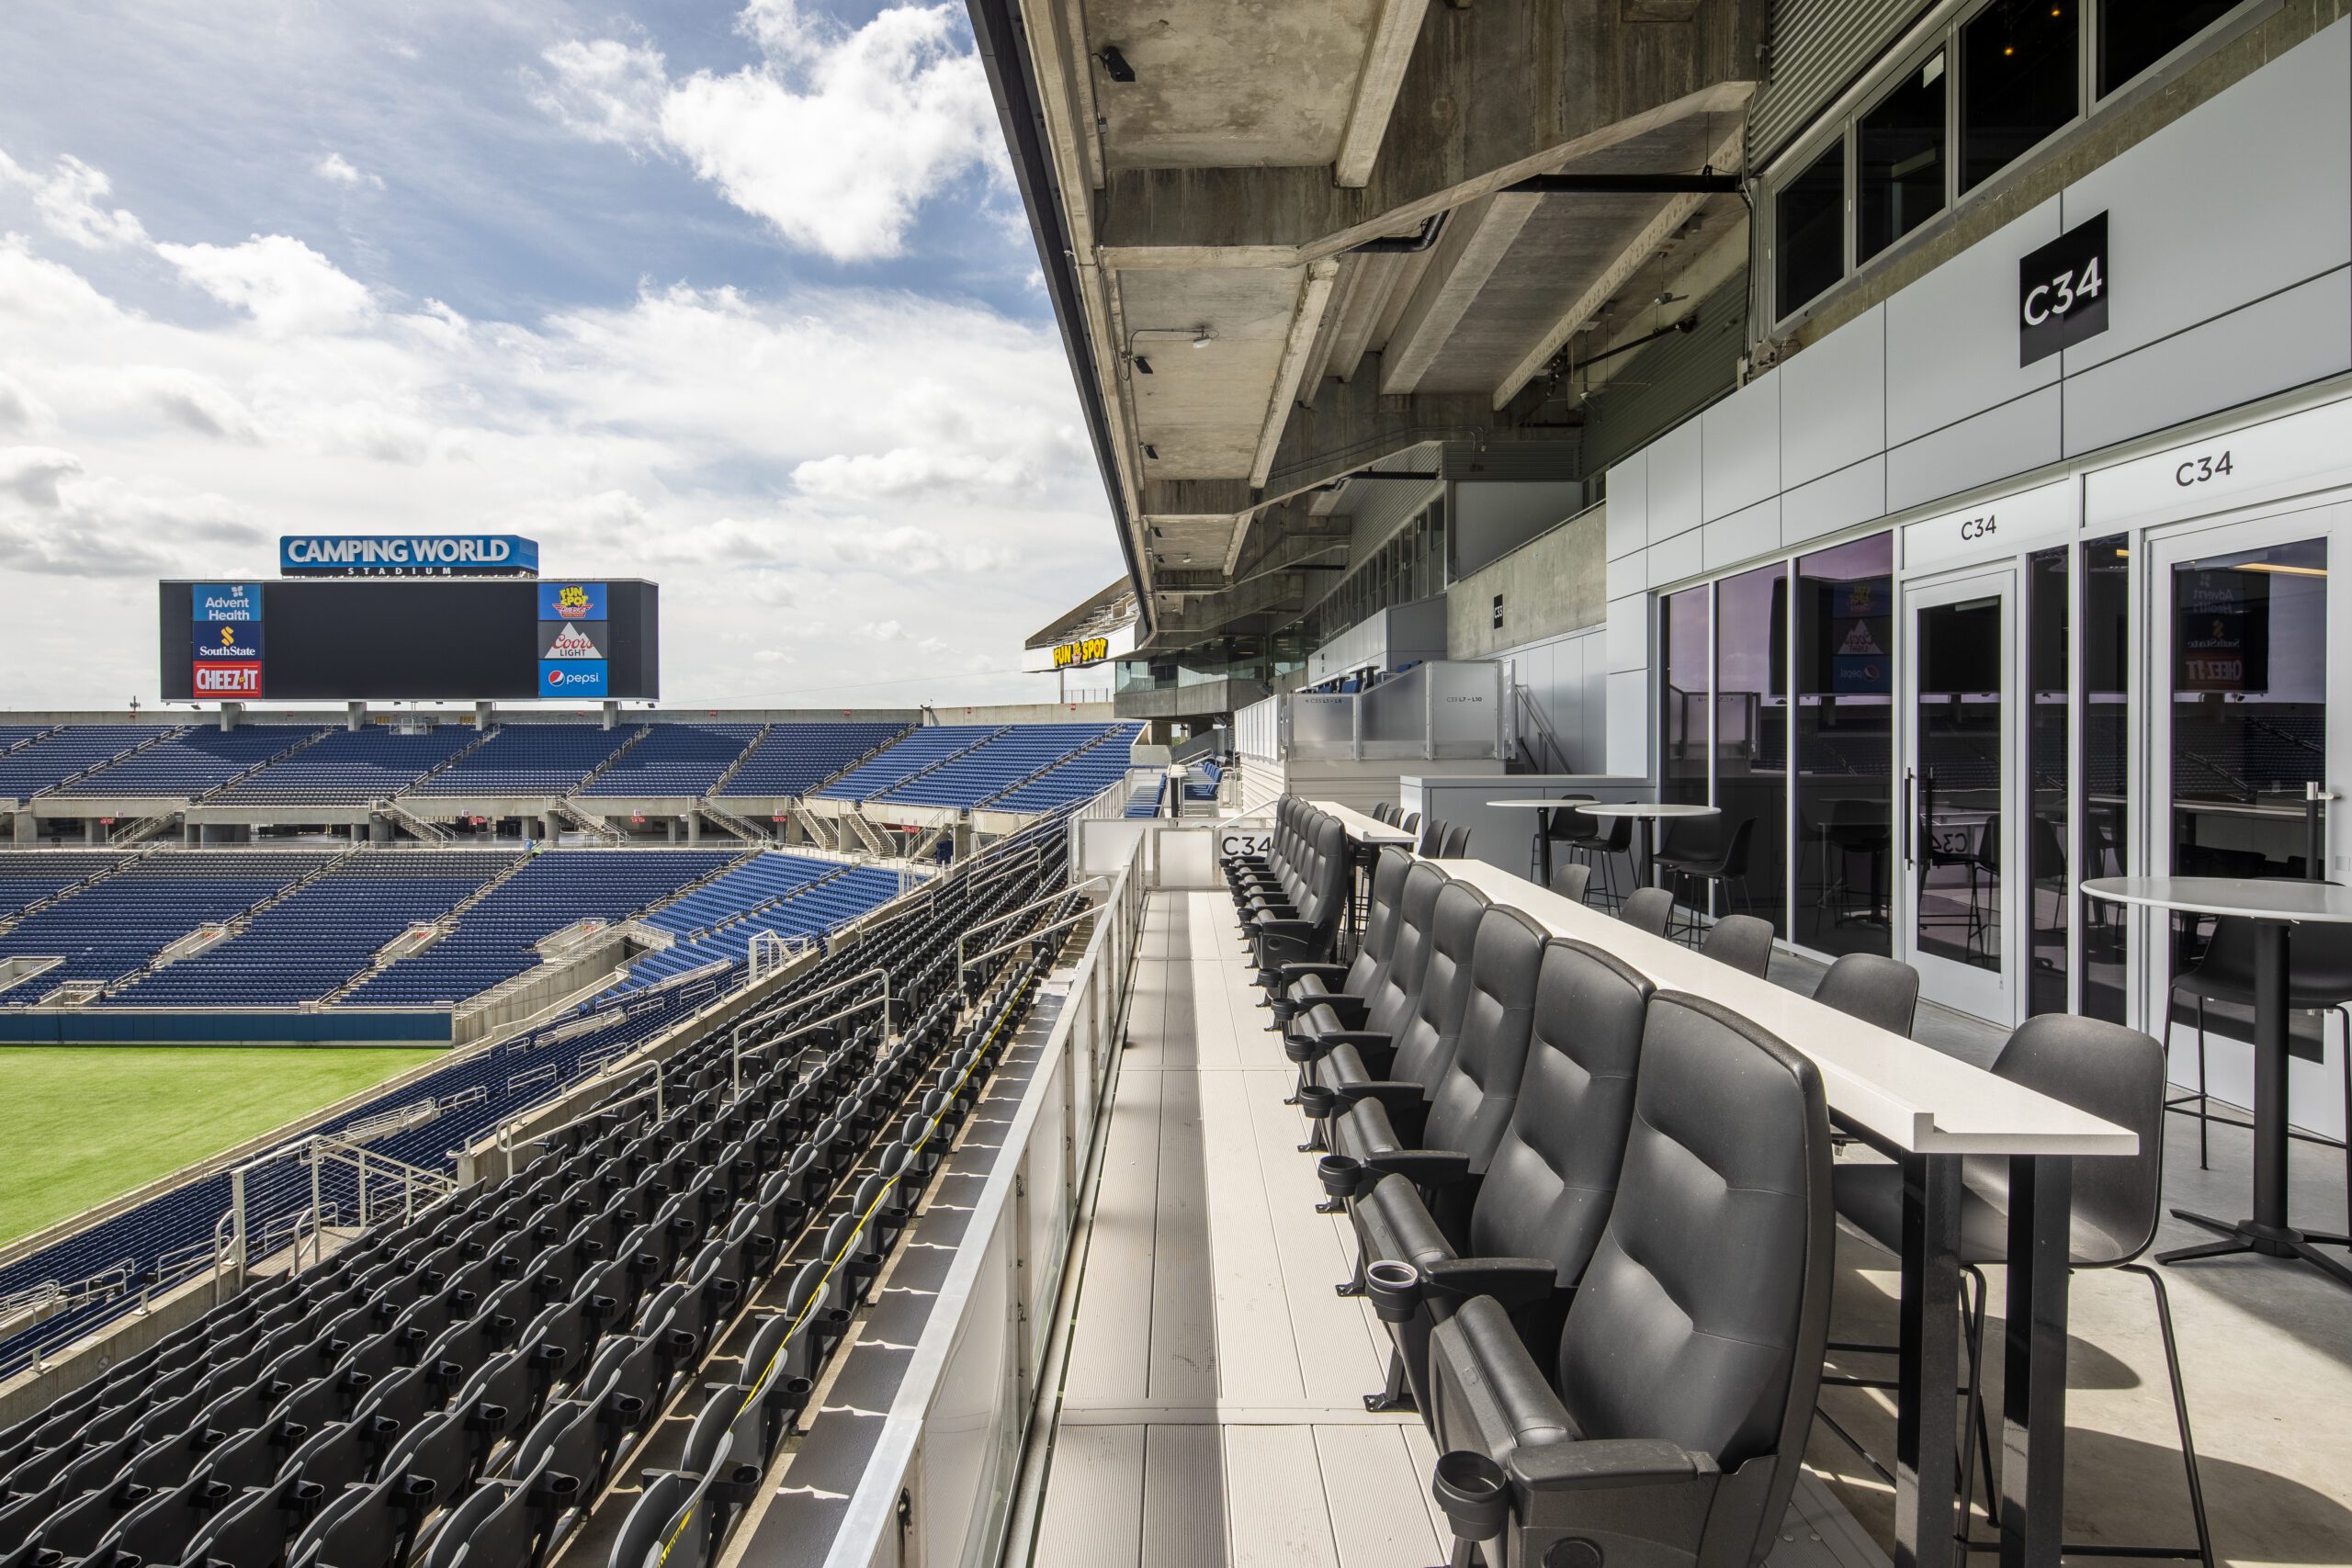 Improved club-level seating provides guest with the ultimate fan experience